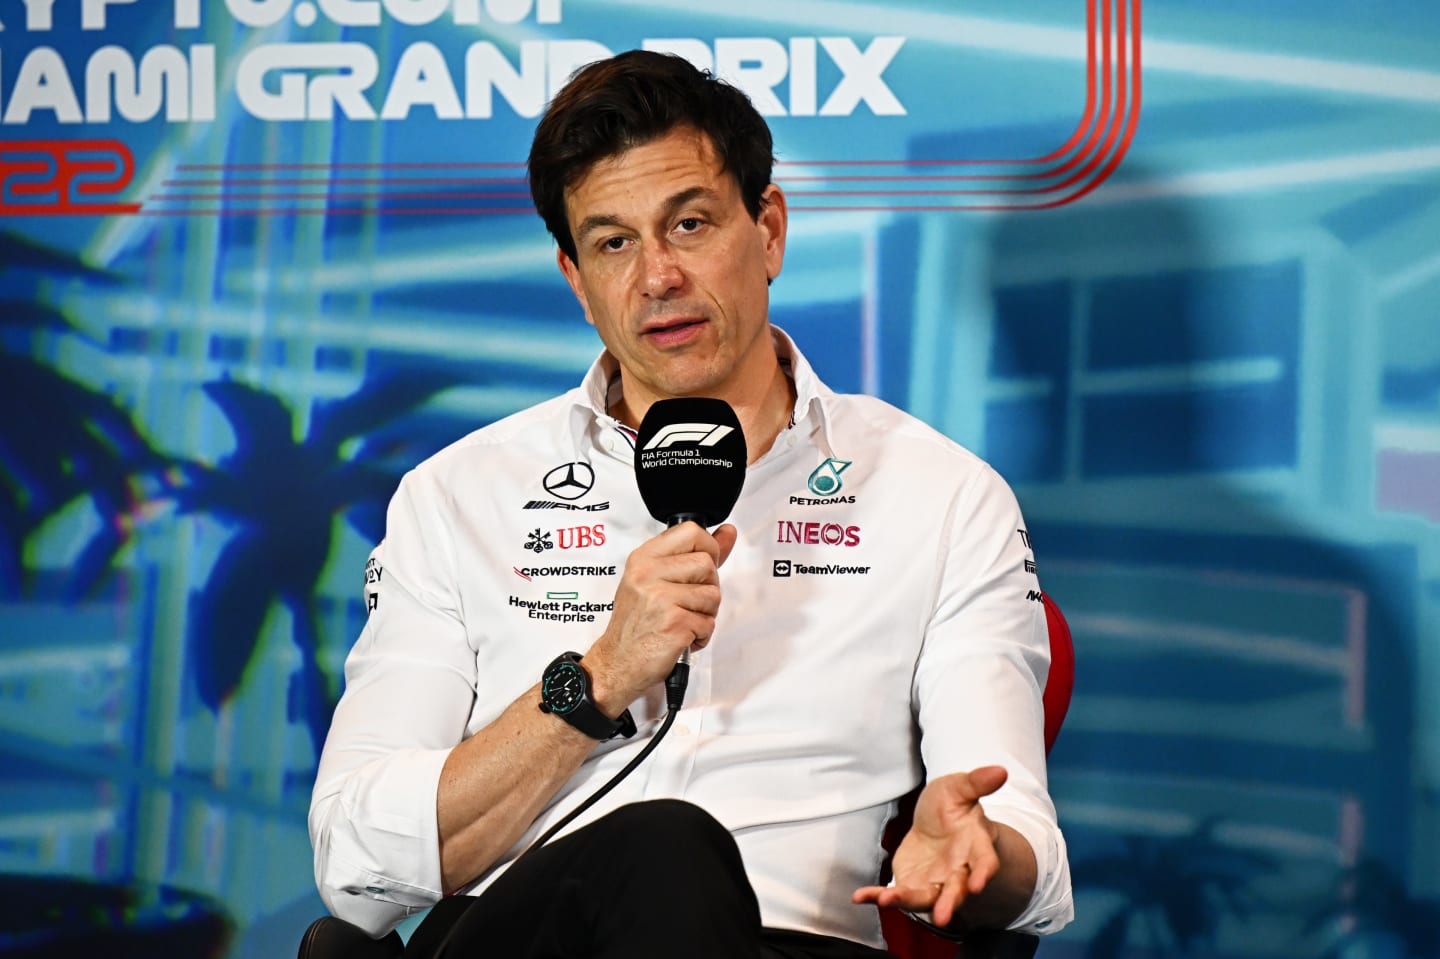 MIAMI, FLORIDA - MAY 07: Mercedes GP Executive Director Toto Wolff talks in the Team Principals Press Conference prior to final practice ahead of the F1 Grand Prix of Miami at the Miami International Autodrome on May 07, 2022 in Miami, Florida. (Photo by Clive Mason/Getty Images)